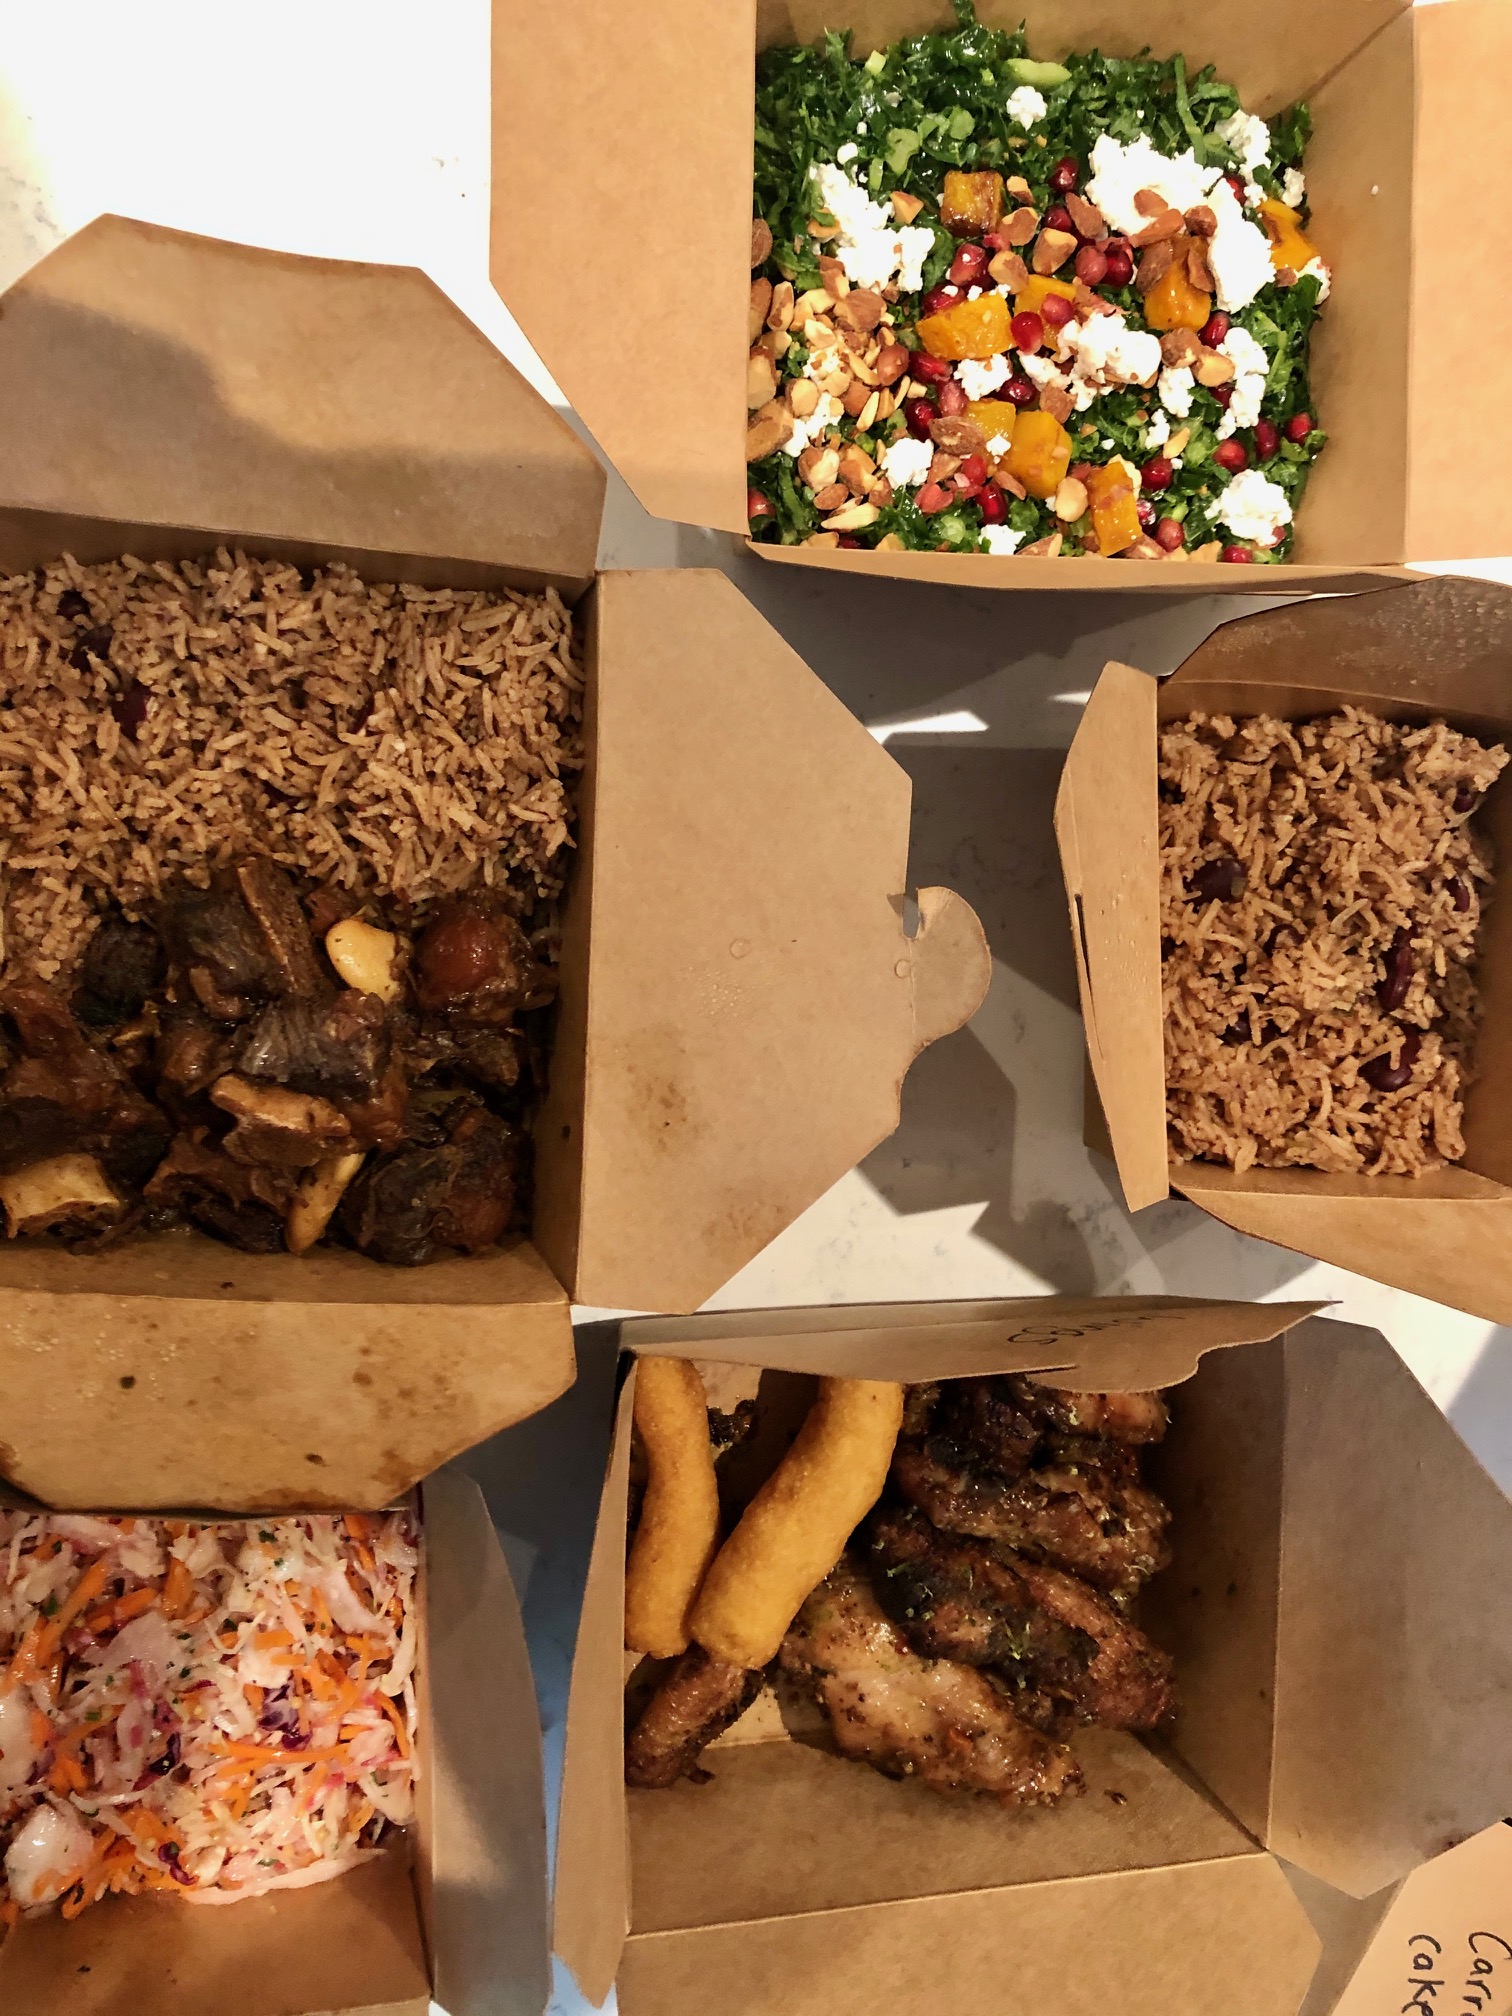 Madame Marie’s Weekly Roundup: Toronto’s Best Takeout and Delivery During COVID-19 – June 18, 2020